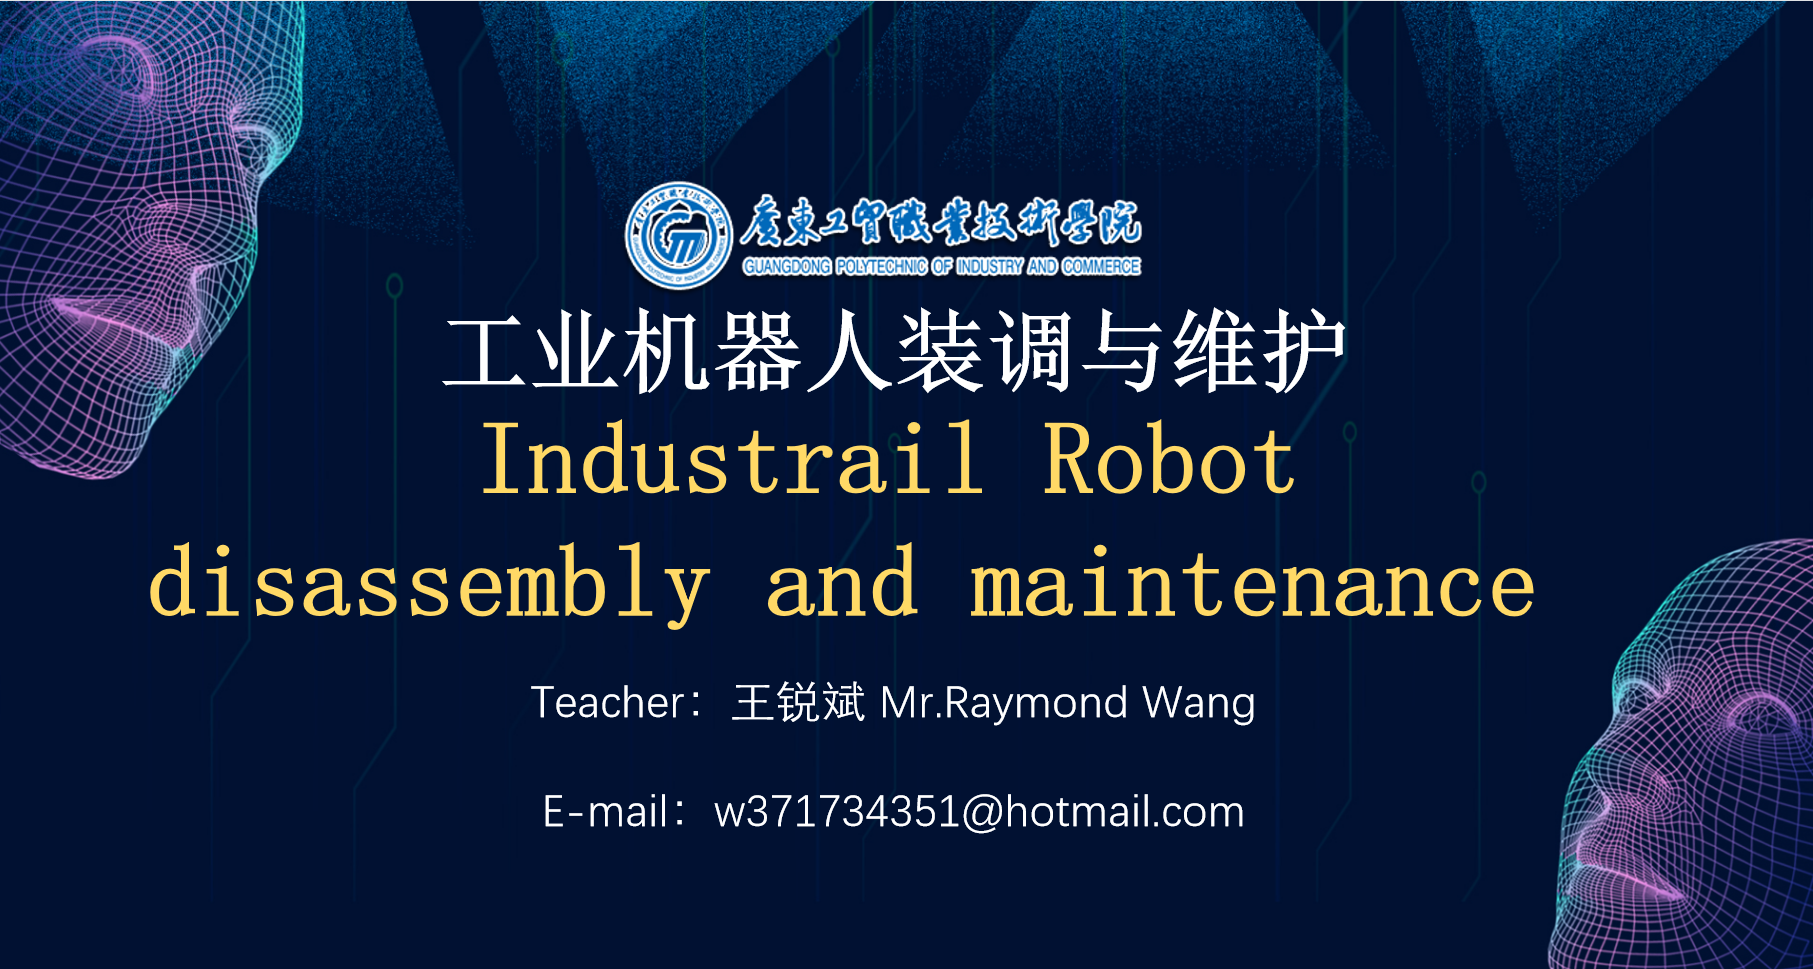 Industrial Robot disassembly and maintenance